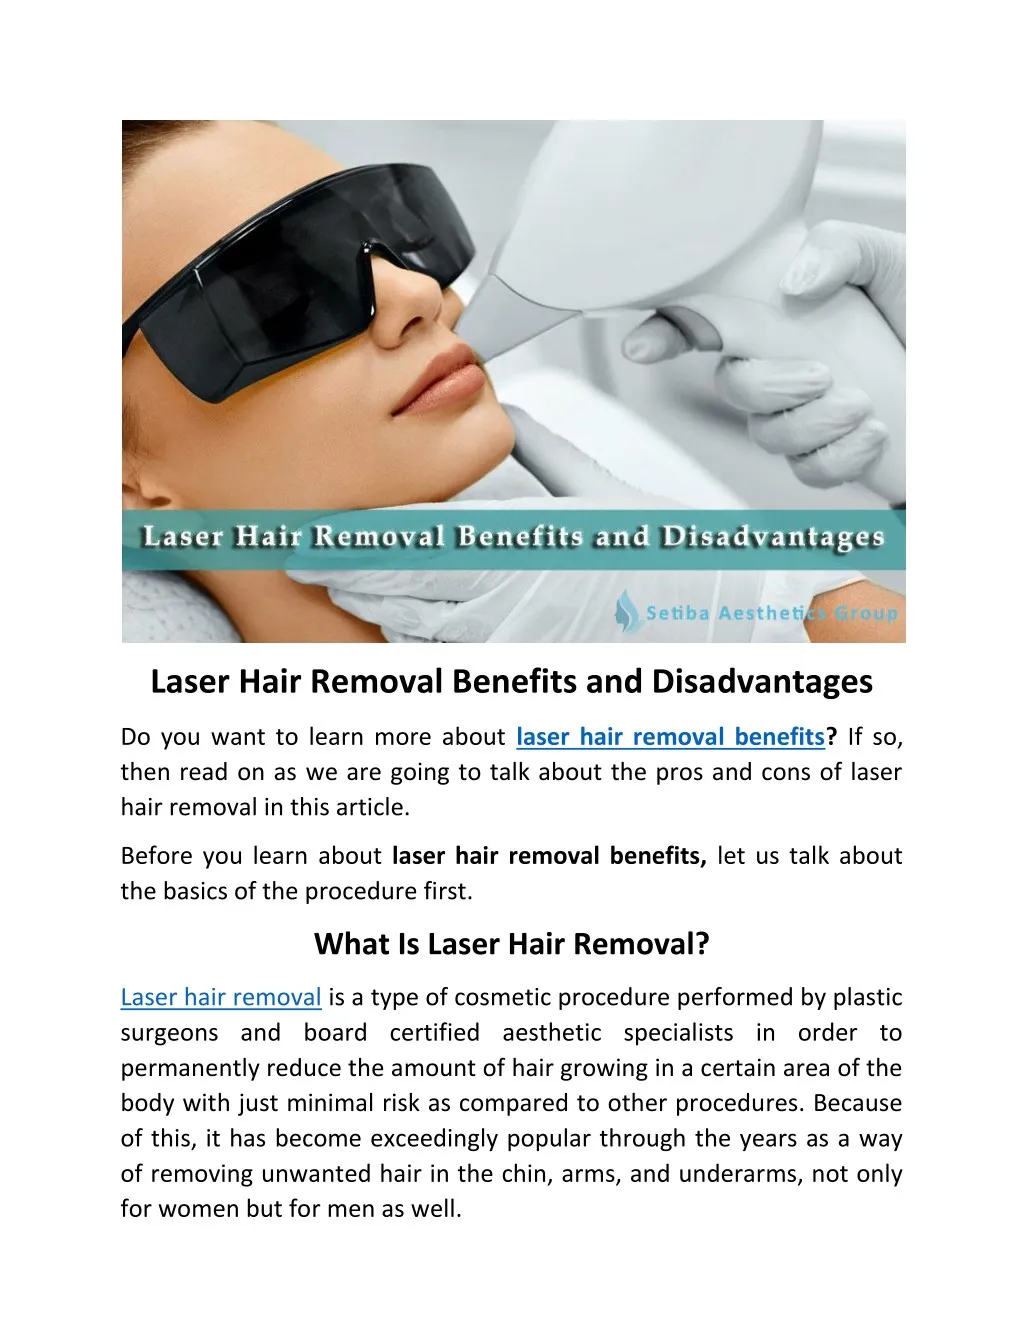 laser hair removal benefits and disadvantages